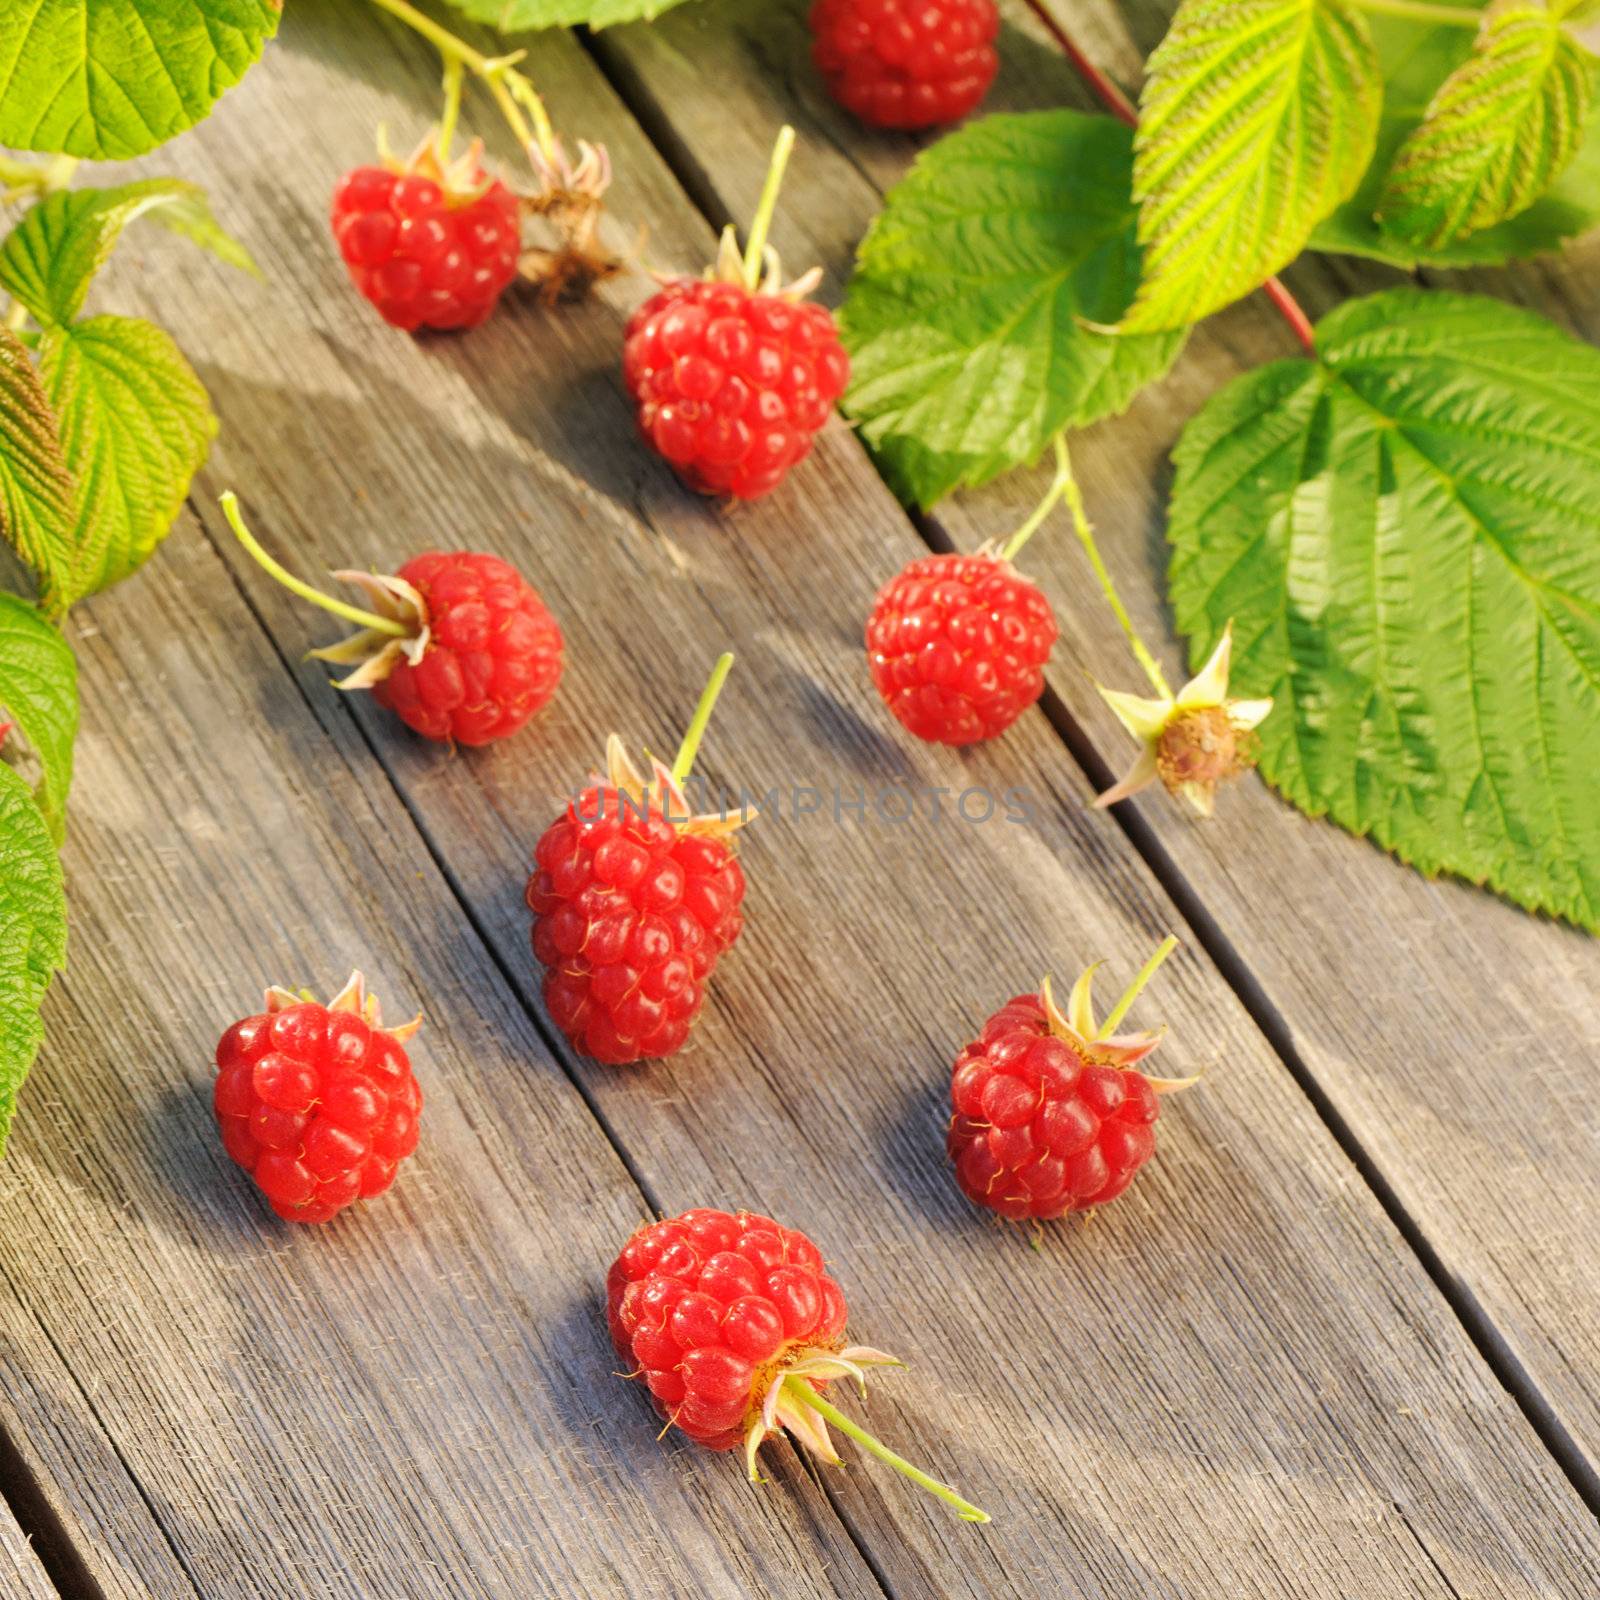 Raspberry on wooden table by haveseen